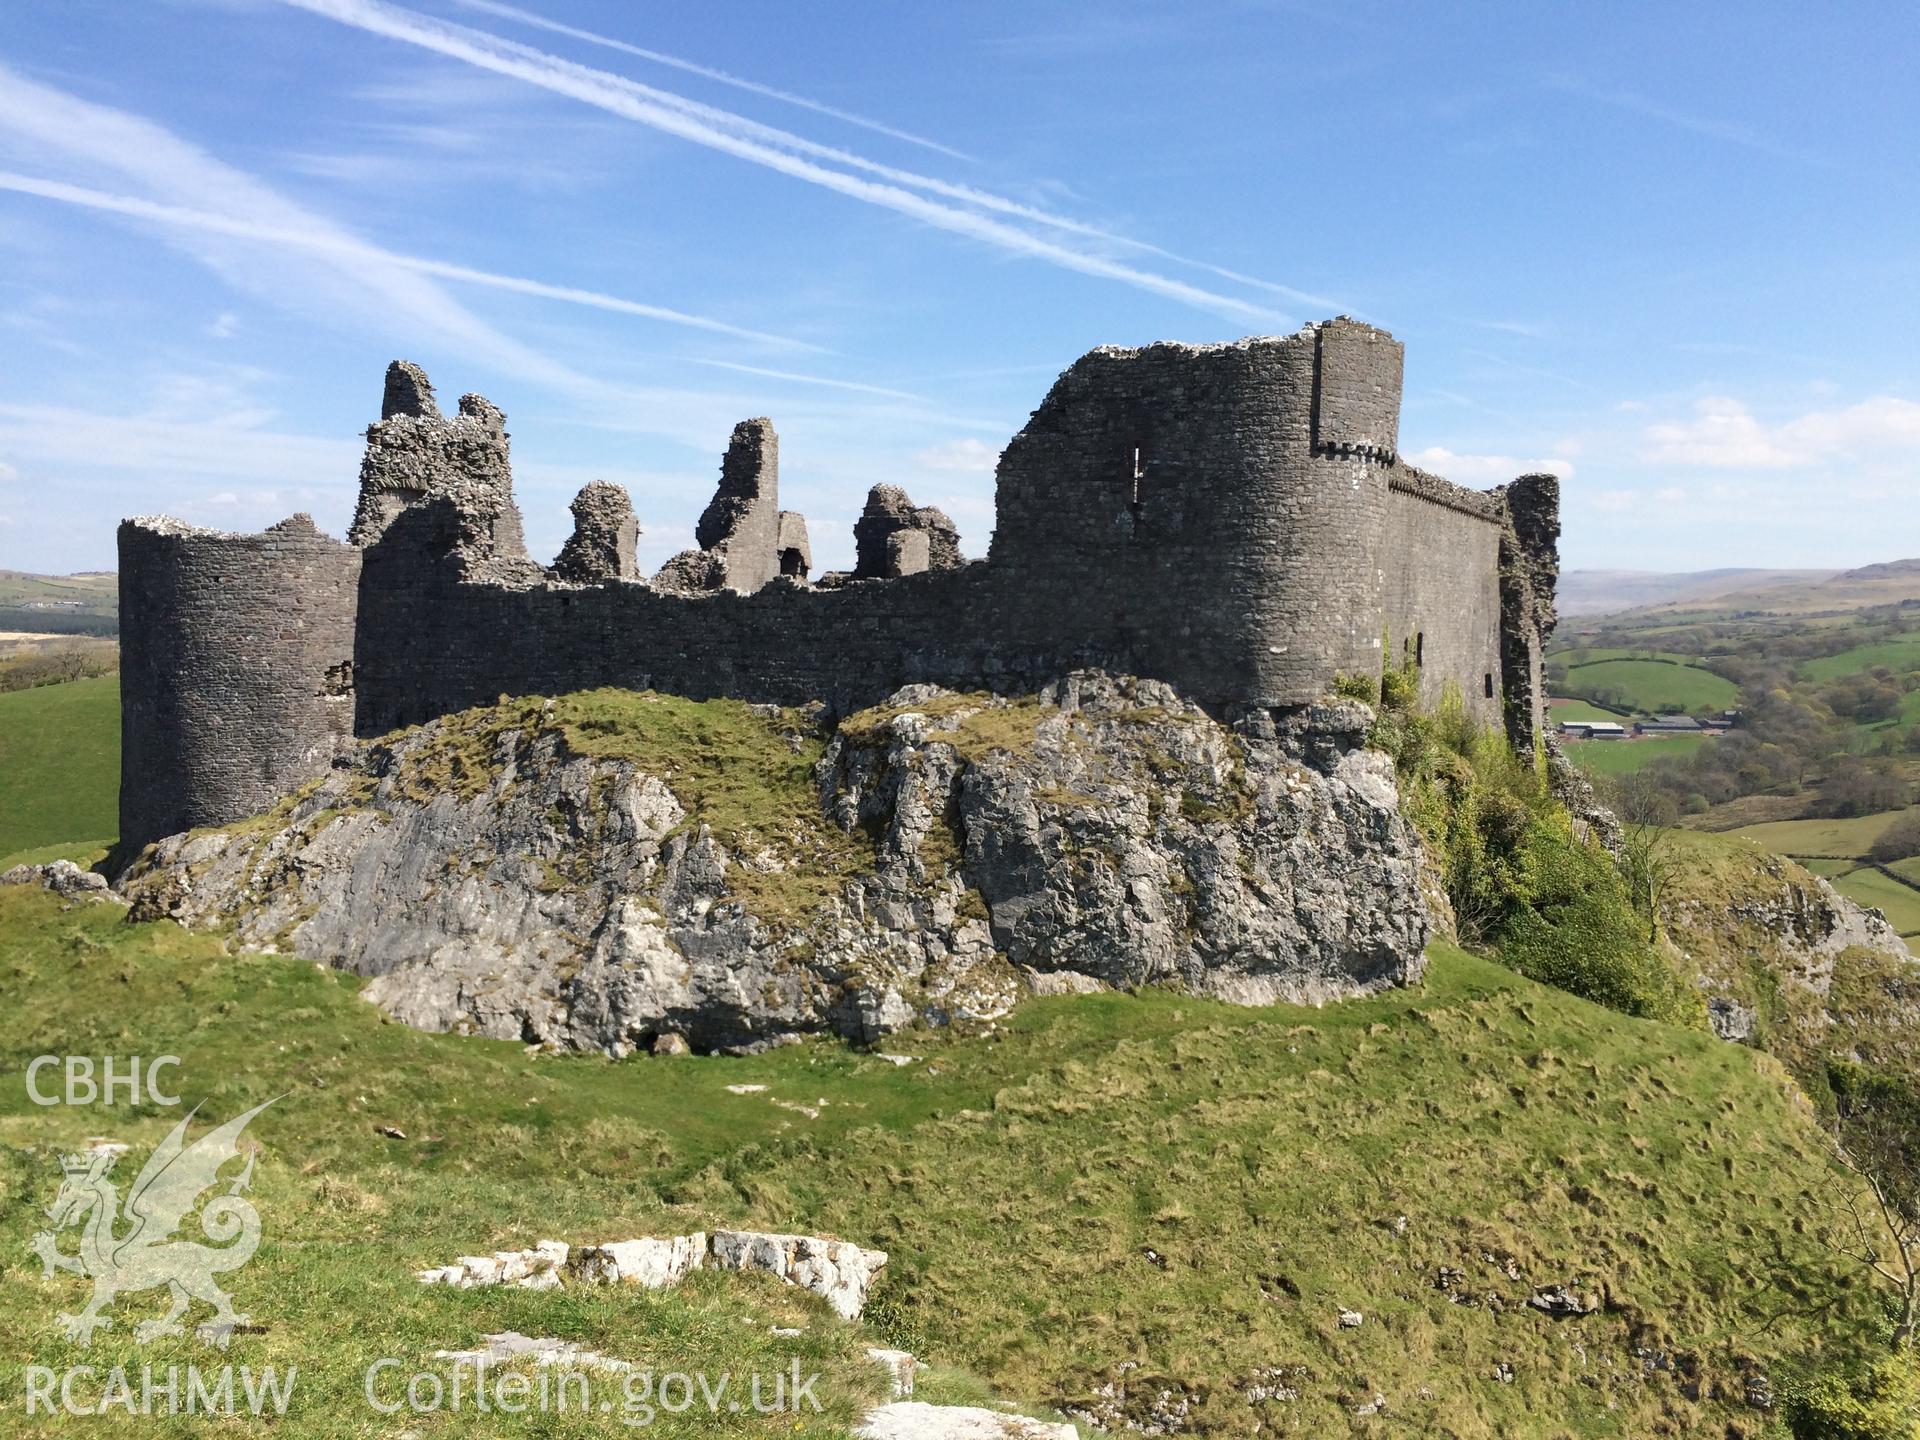 Colour photo showing Carreg Cennen, produced by  Paul R. Davis, 5th May 2016.